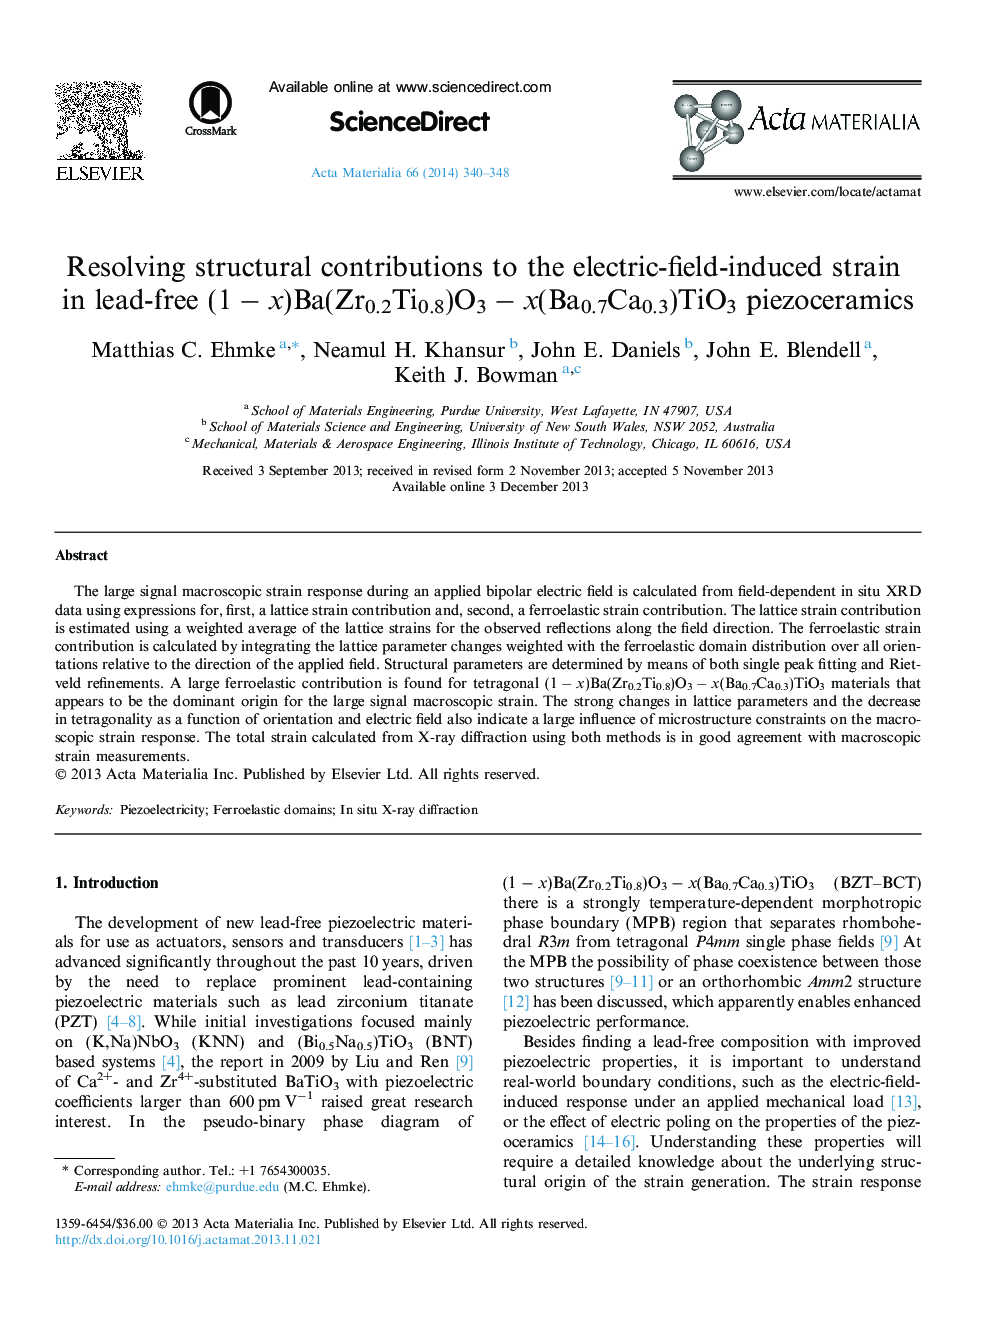 Resolving structural contributions to the electric-field-induced strain in lead-free (1 − x)Ba(Zr0.2Ti0.8)O3 − x(Ba0.7Ca0.3)TiO3 piezoceramics